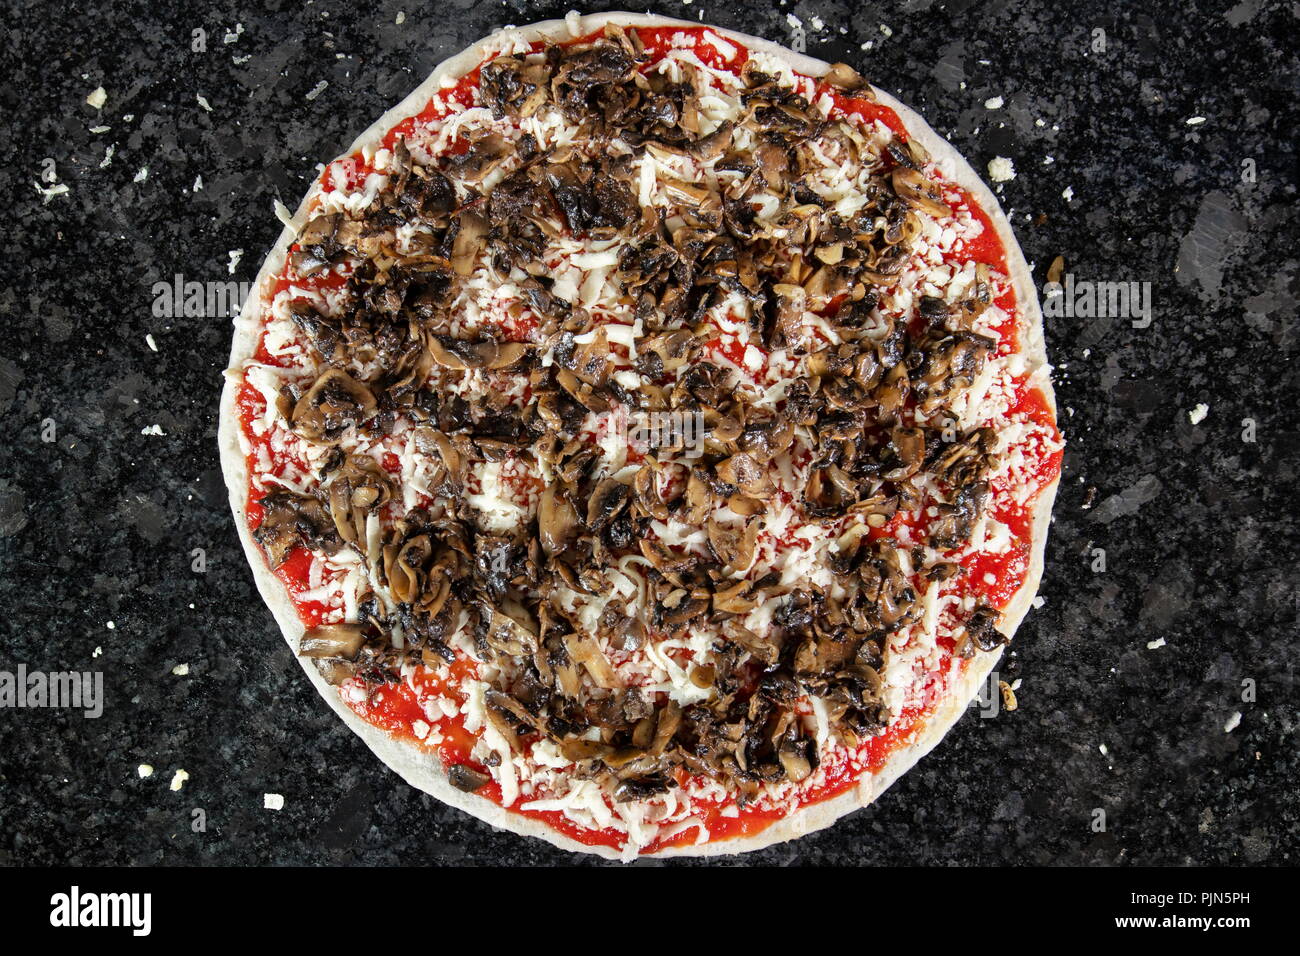 Pizza with mushrooms on black table, ready to be put in the oven to be baked Stock Photo